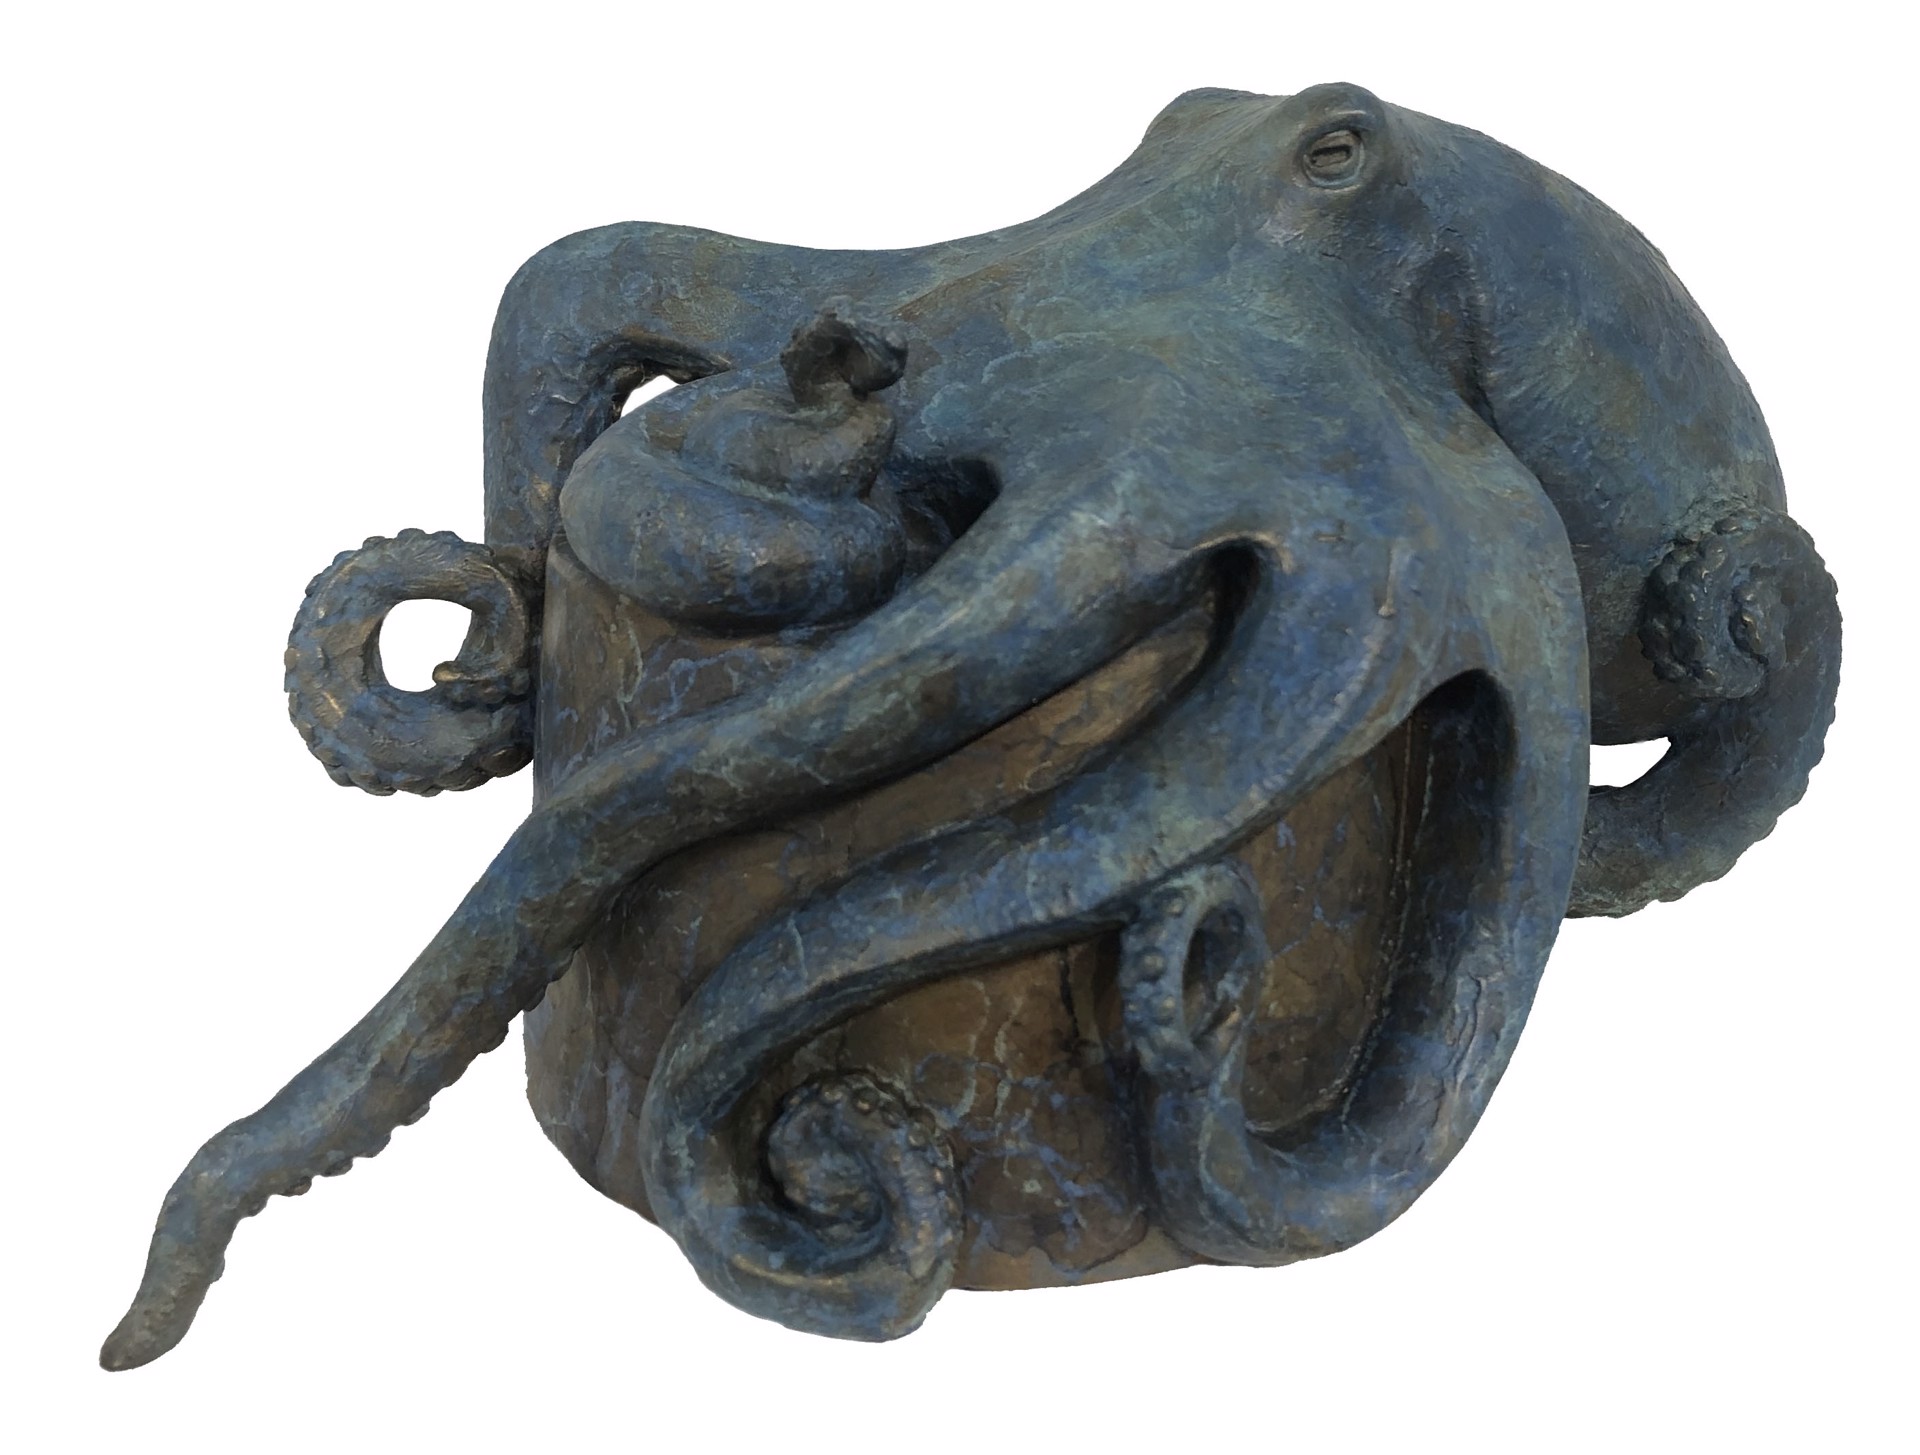 A Contemporary Bronze Depicting An Octopus Cradling A Cylindrical Shape With A Blue Textured Patina By Kristine Taylor At Gallery Wild